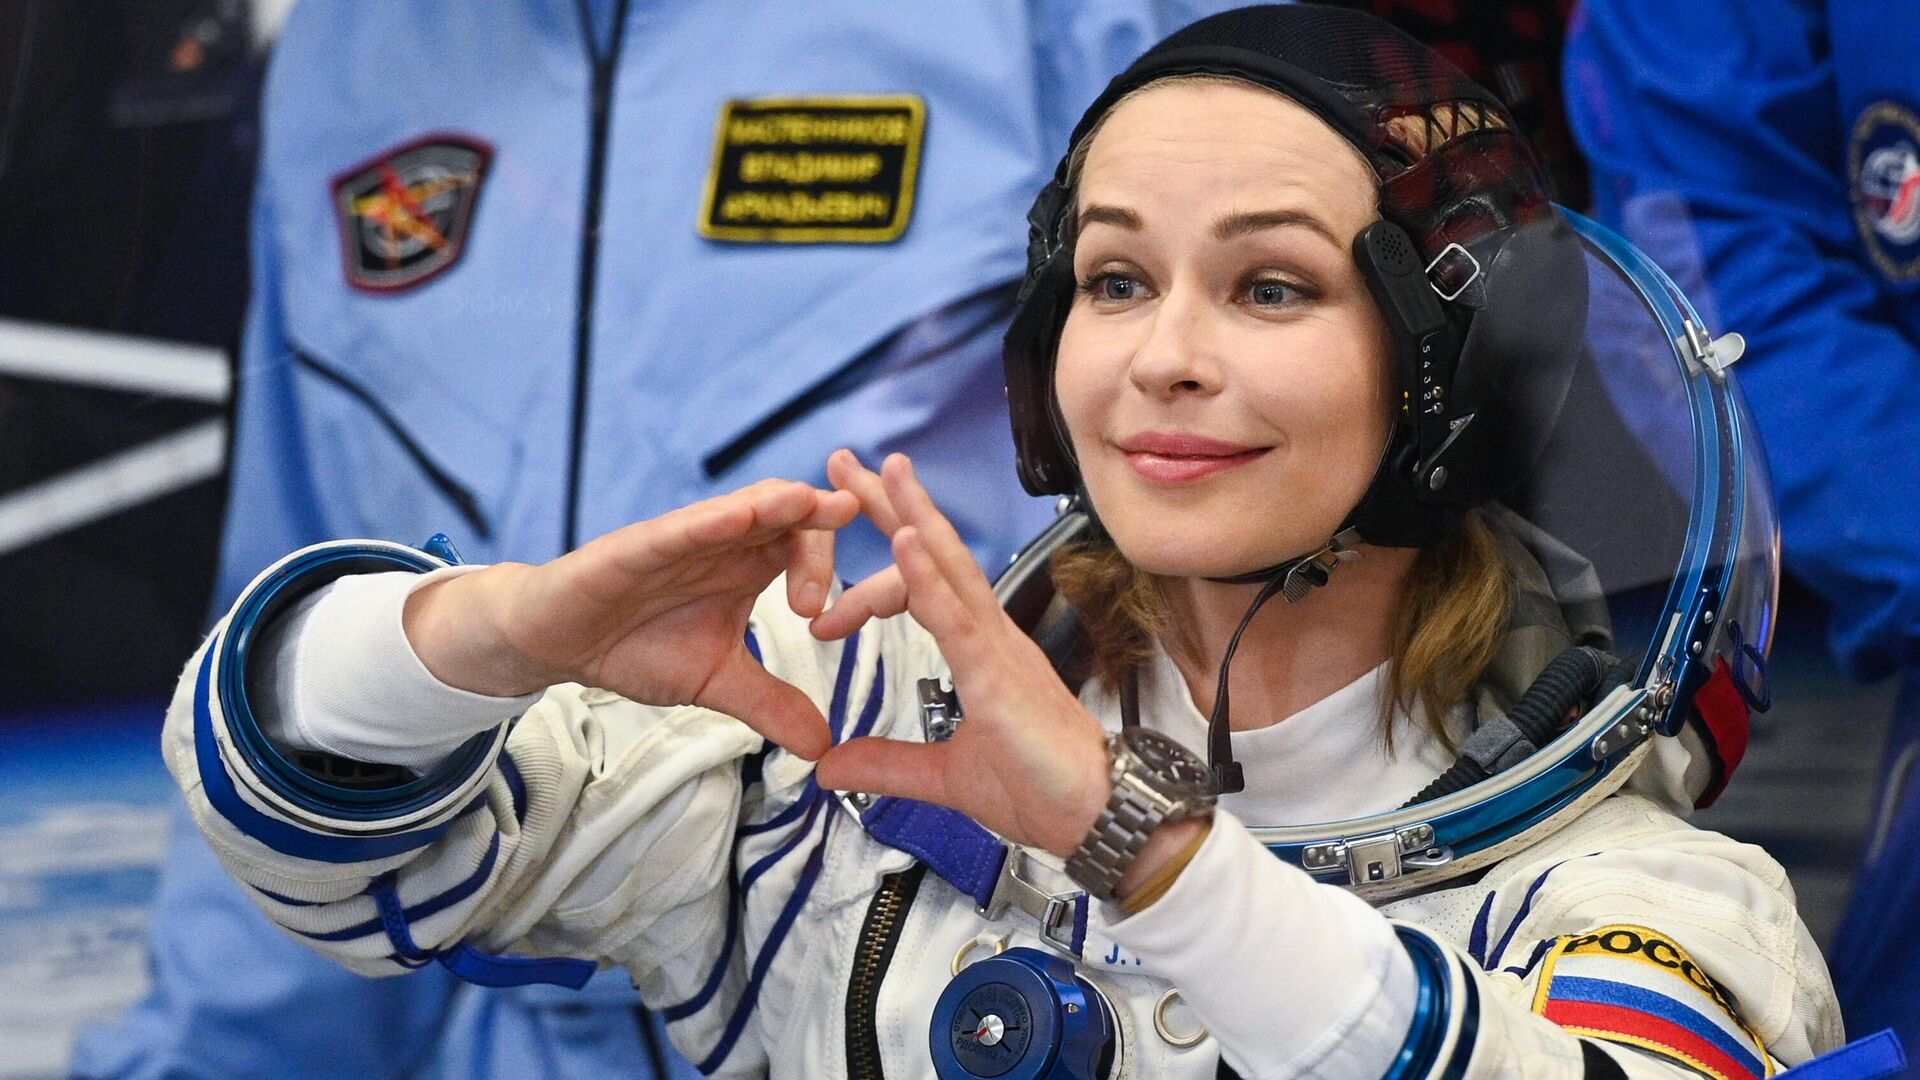 Actress Yulia Peresild of the ISS Expedition 66 prime crew puts on her spacesuit at the Baikonur Cosmodrome, in Baikonur, Kazakhstan. The launch of the Soyuz MS-19 mission to be involved in making the feature film The Challenge aboard the International Space Station is scheduled for 5 October 2021 at 11:55 Moscow time from the Baikonur Cosmodrome - Sputnik International, 1920, 17.10.2021